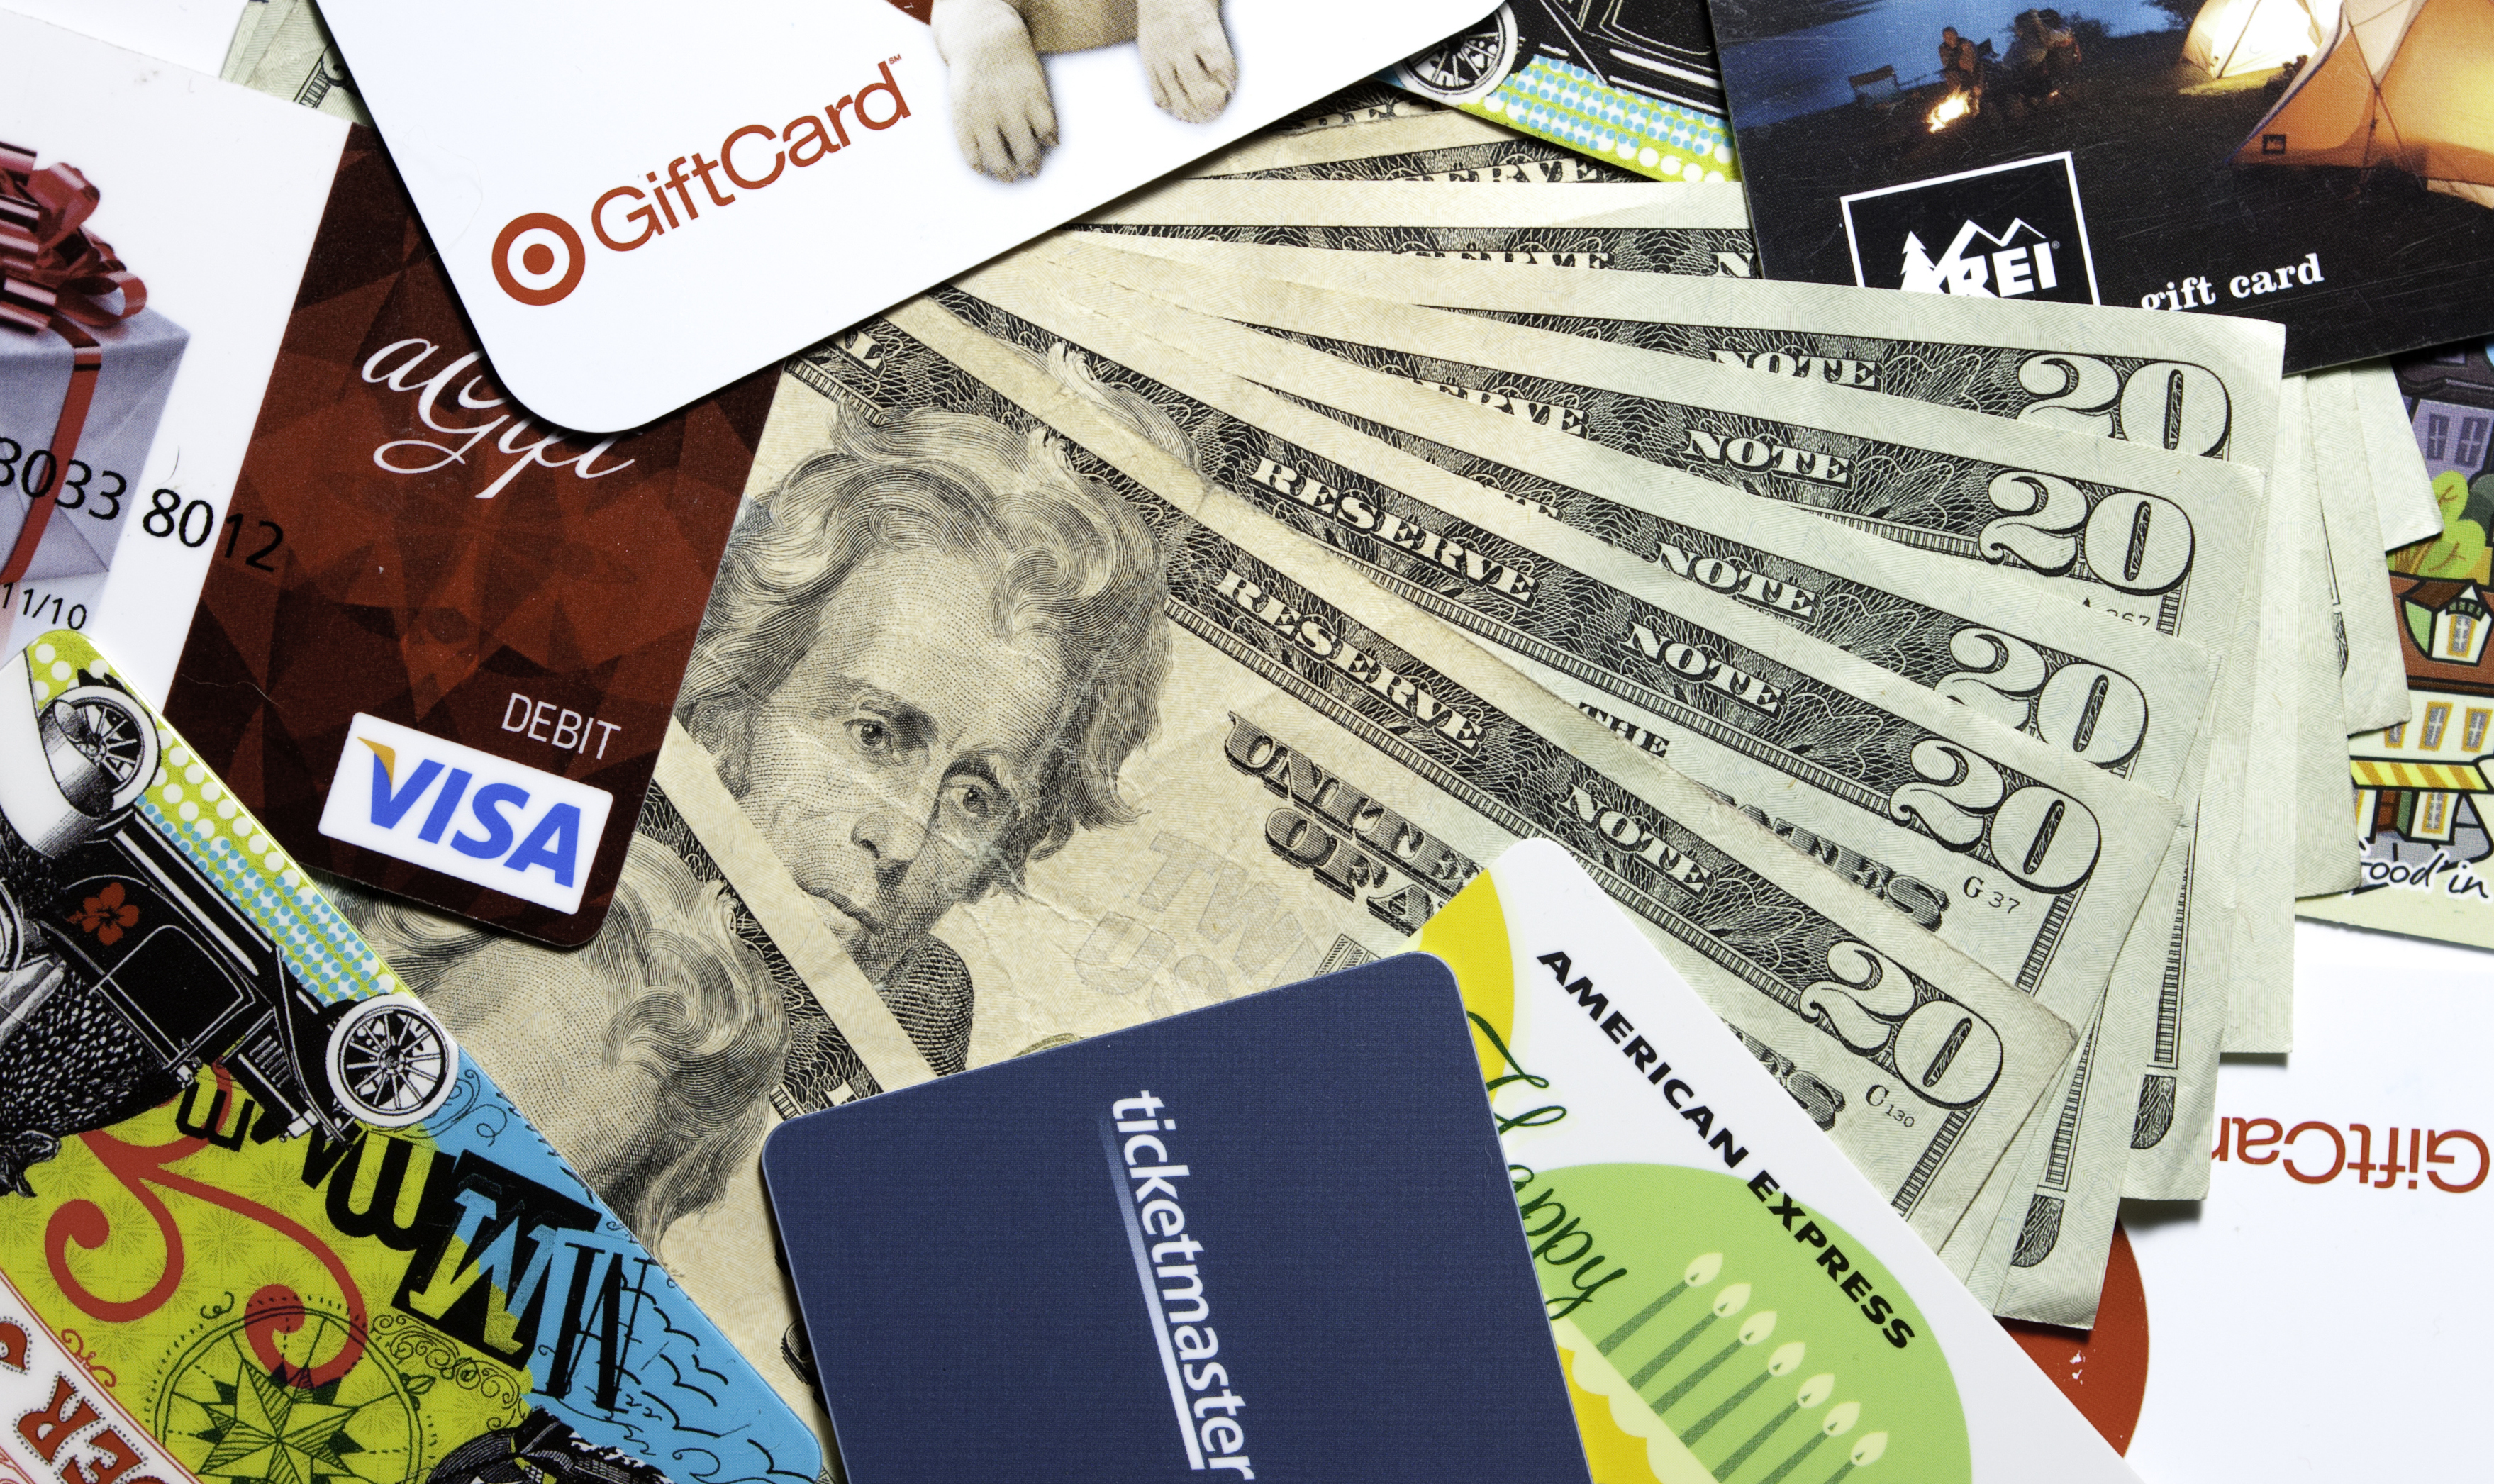 How to Sell and Exchange Unwanted Gift Cards for Cash | Money